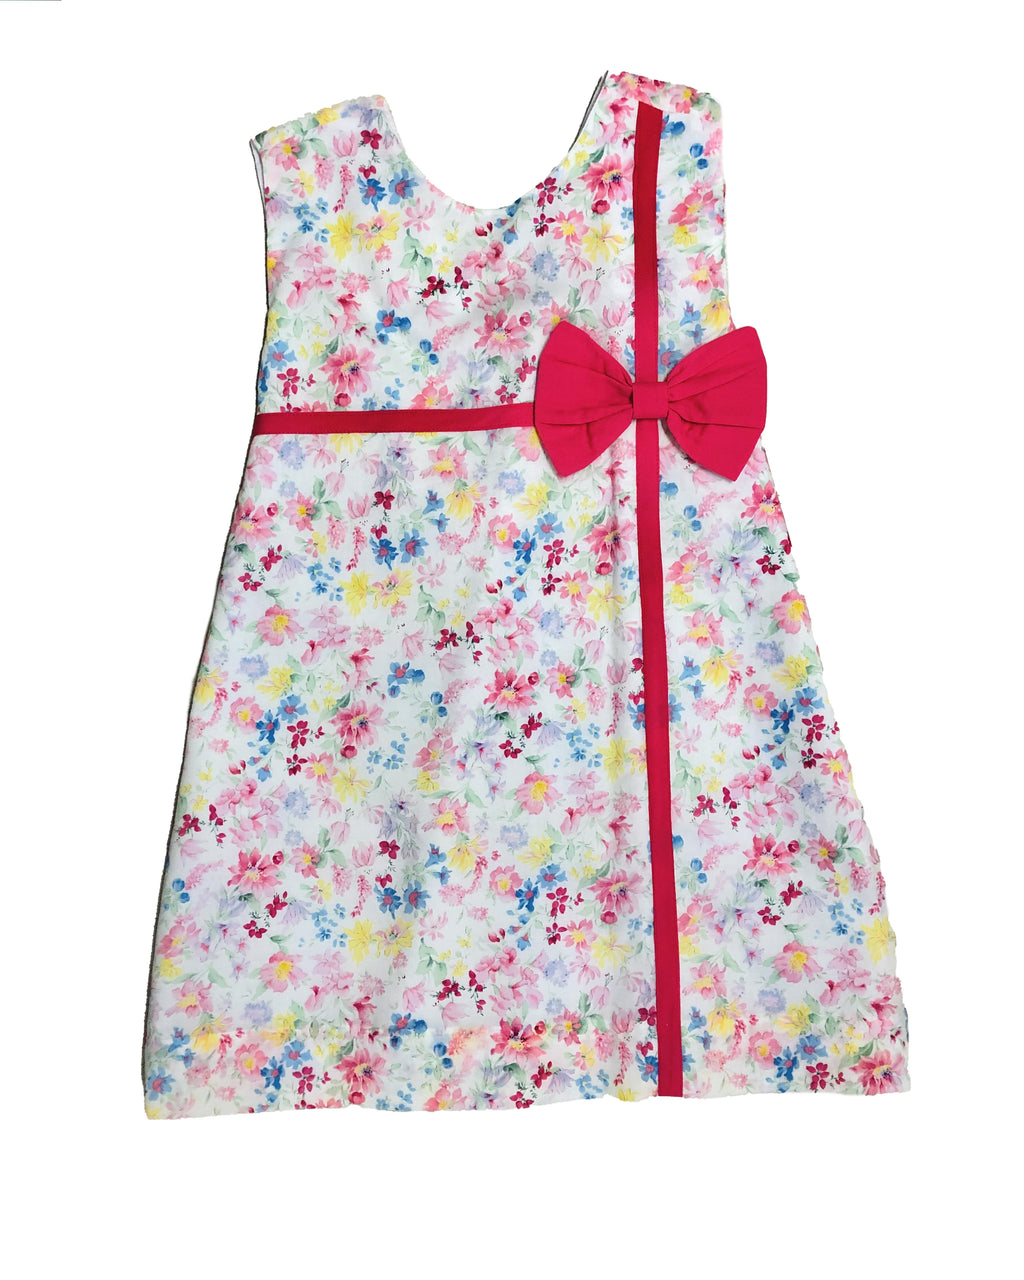 Pink floral Girl's dress - Little Threads Inc. Children's Clothing